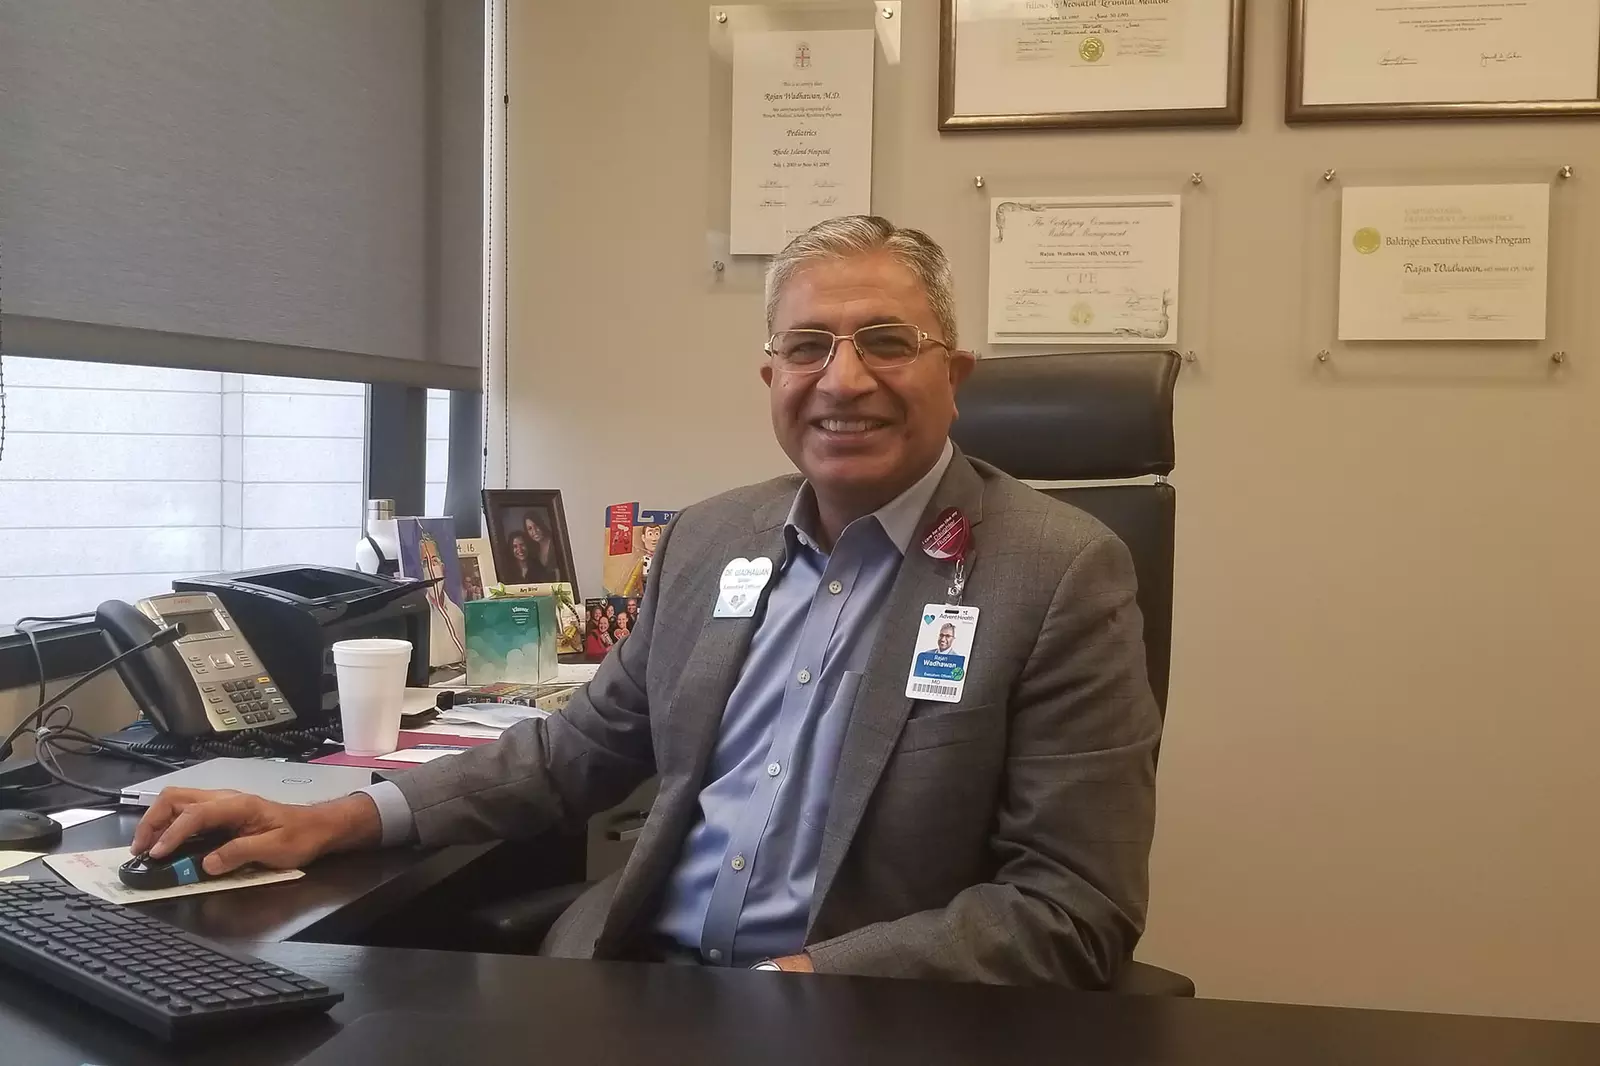 Rajan Wadhawan, M.D. is a neonatologist and senior executive officer of AdventHealth for Children and AdventHealth for Women.